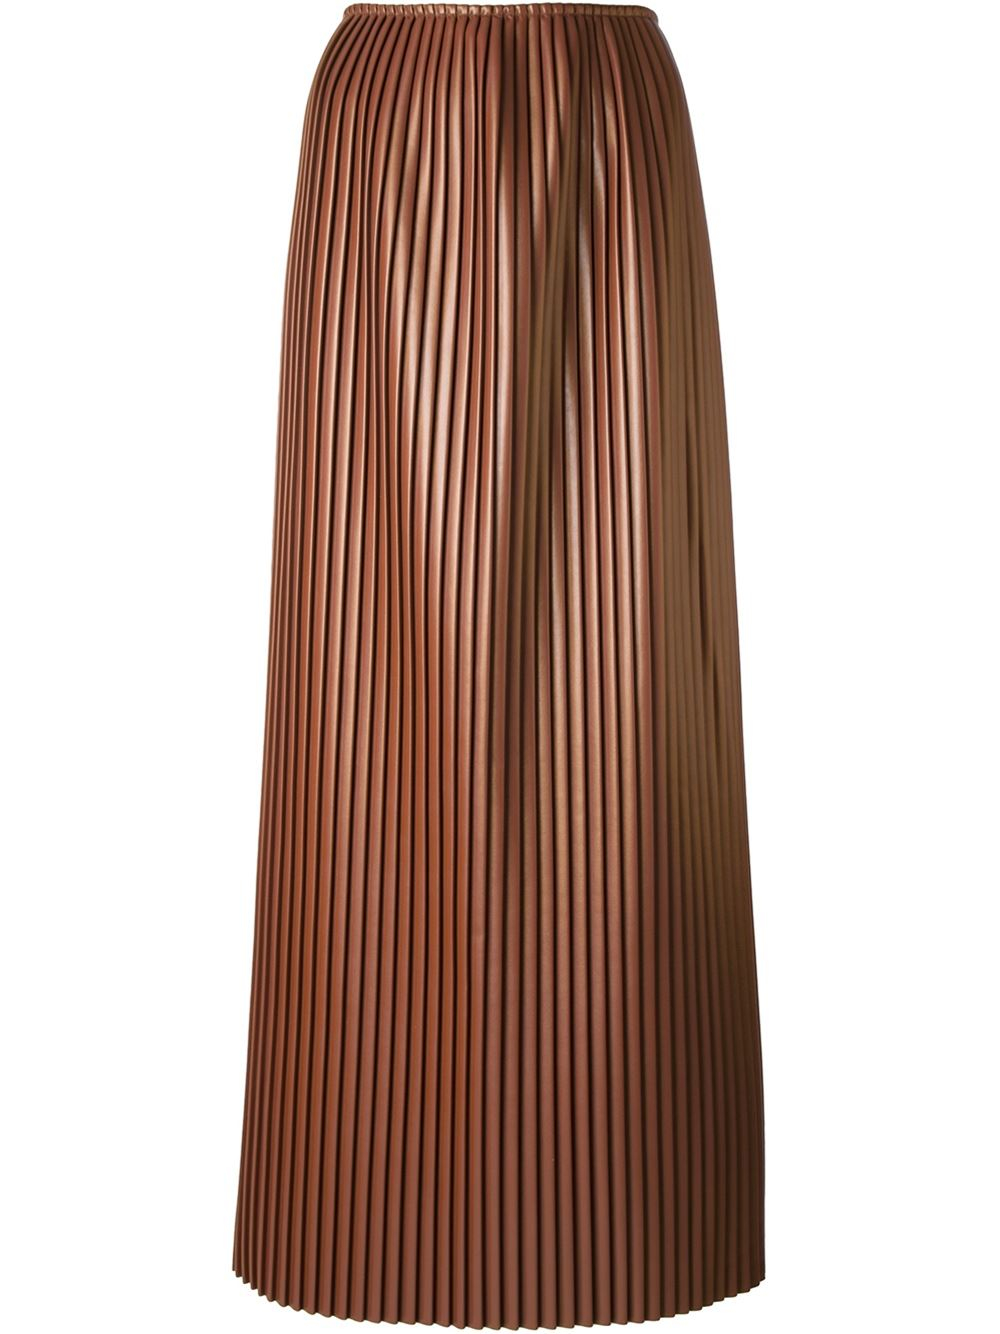 Msgm Long Pleated Skirt in Brown | Lyst